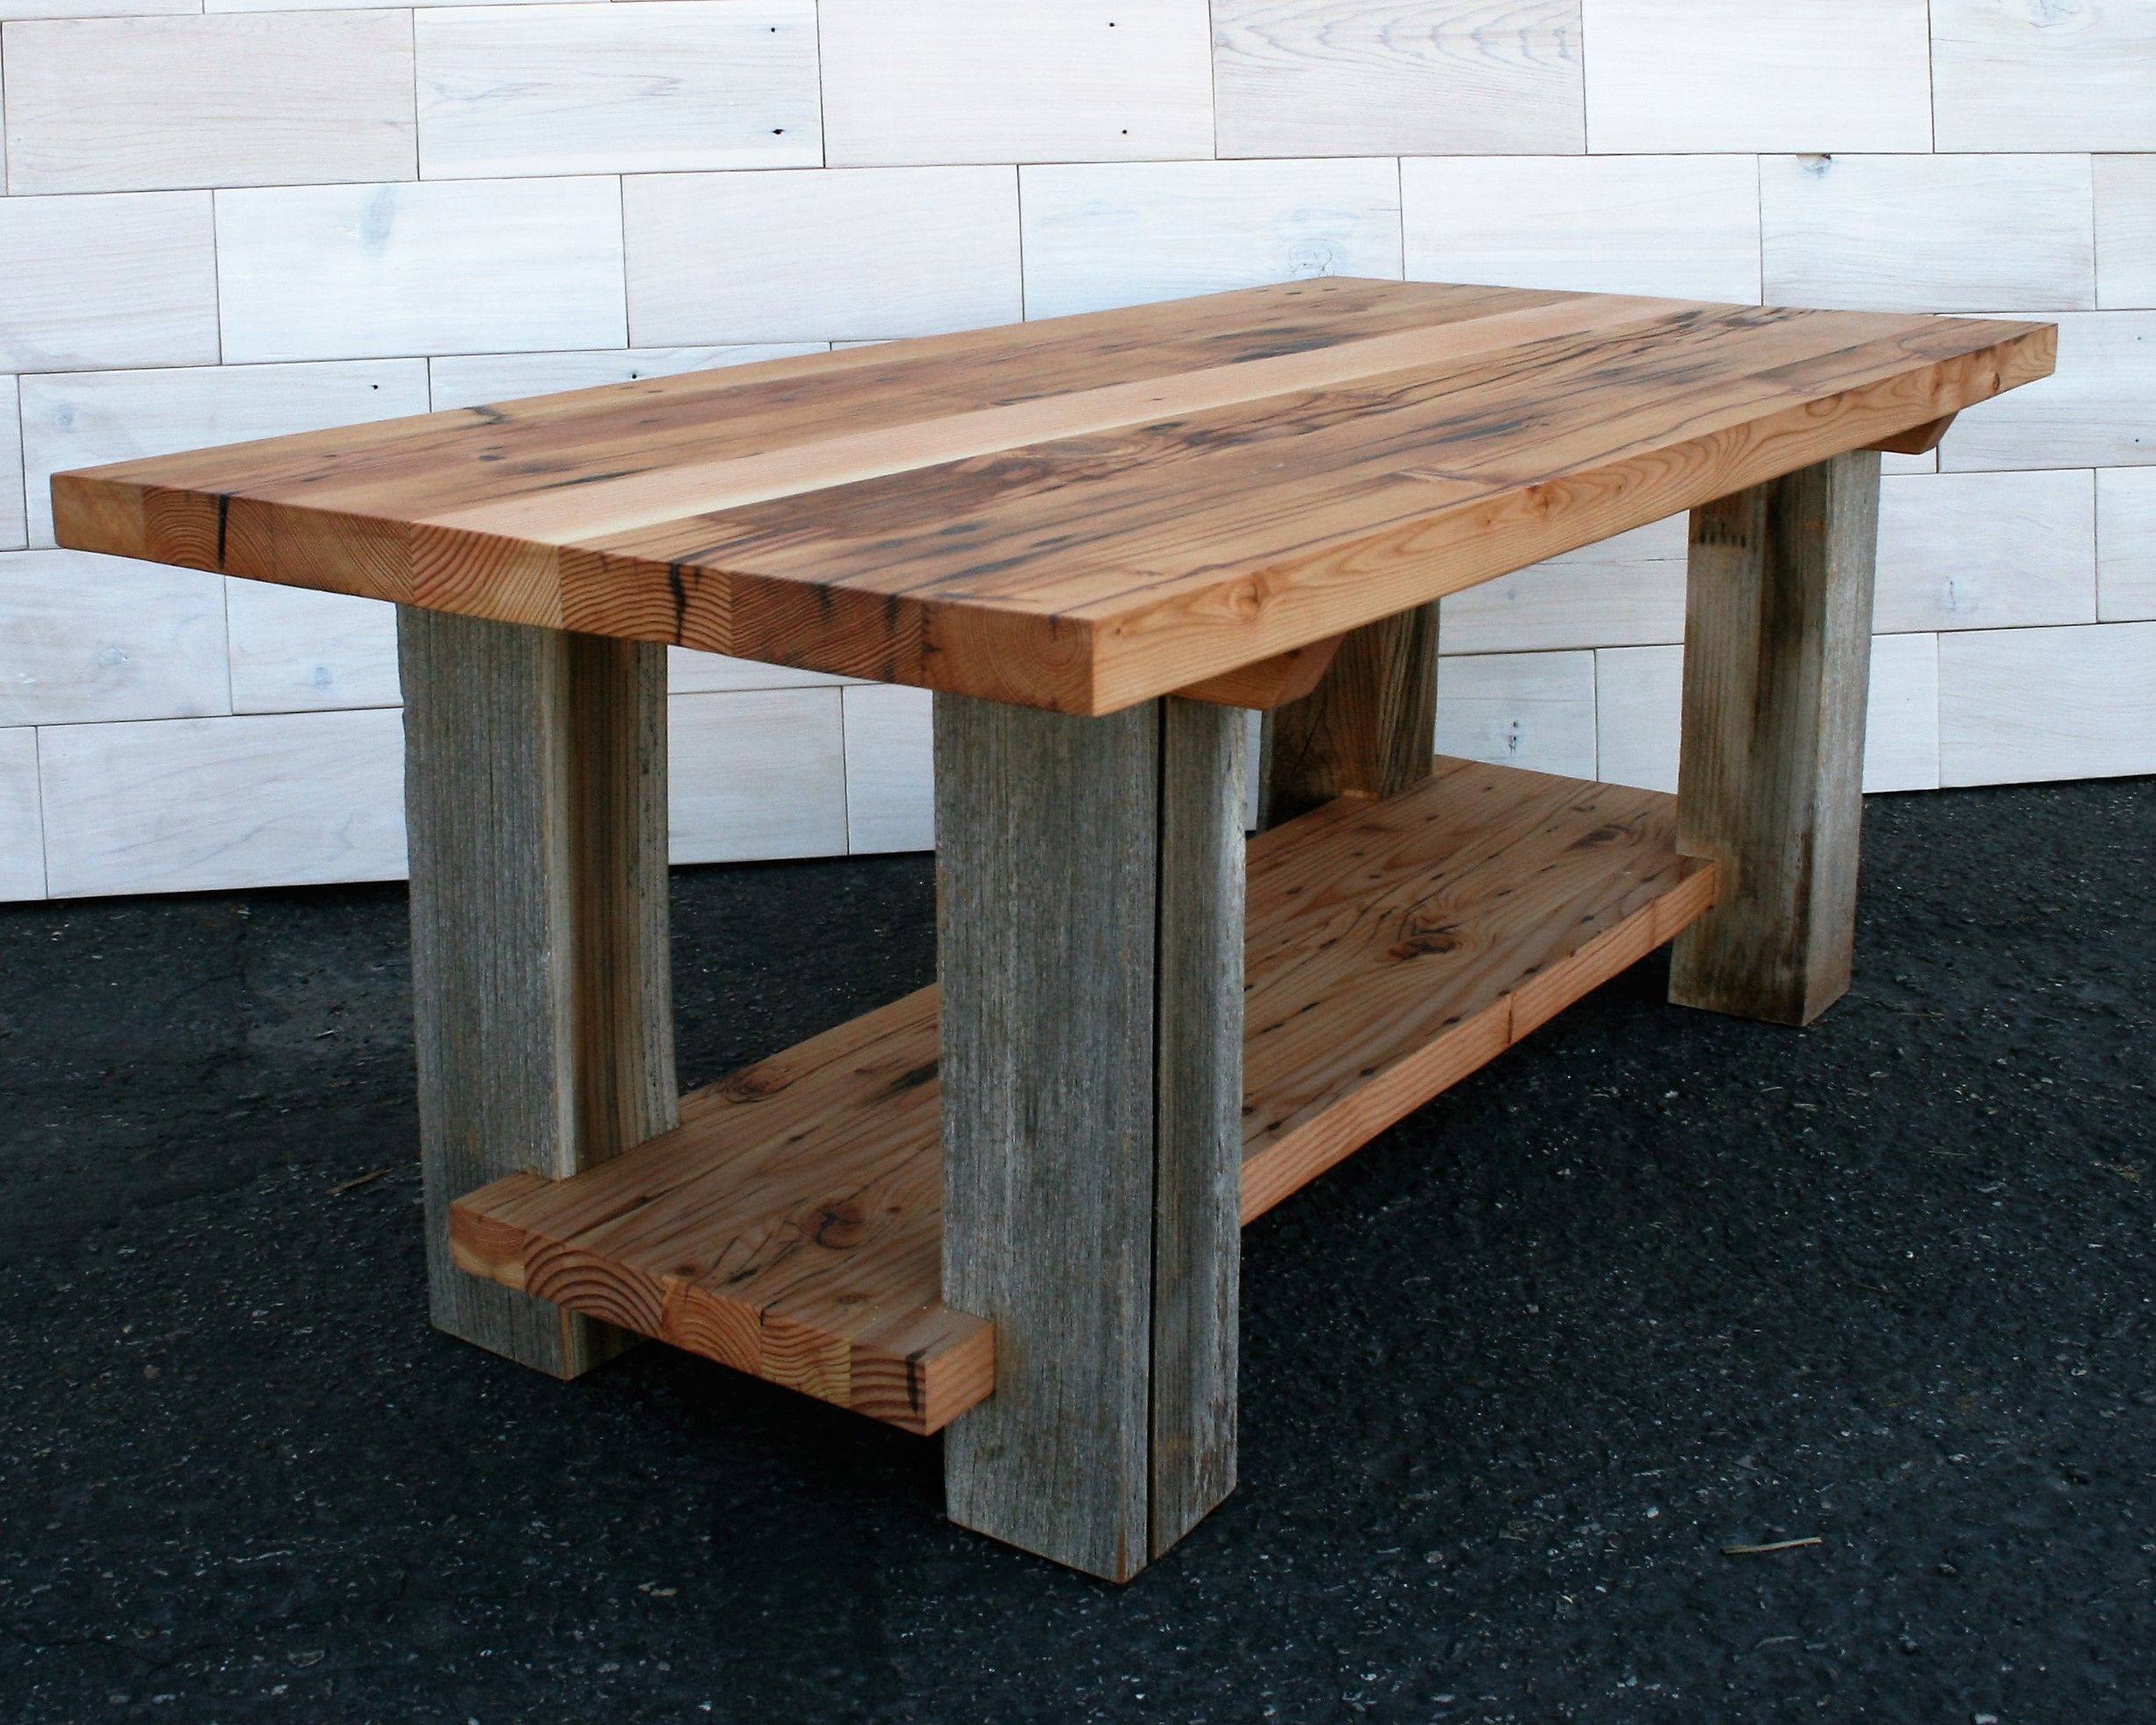 Custom Reclaimed Fir And Barn Wood Coffee Tablehistoricwoods Intended For Coffee Tables With Storage And Barn Doors (View 10 of 20)